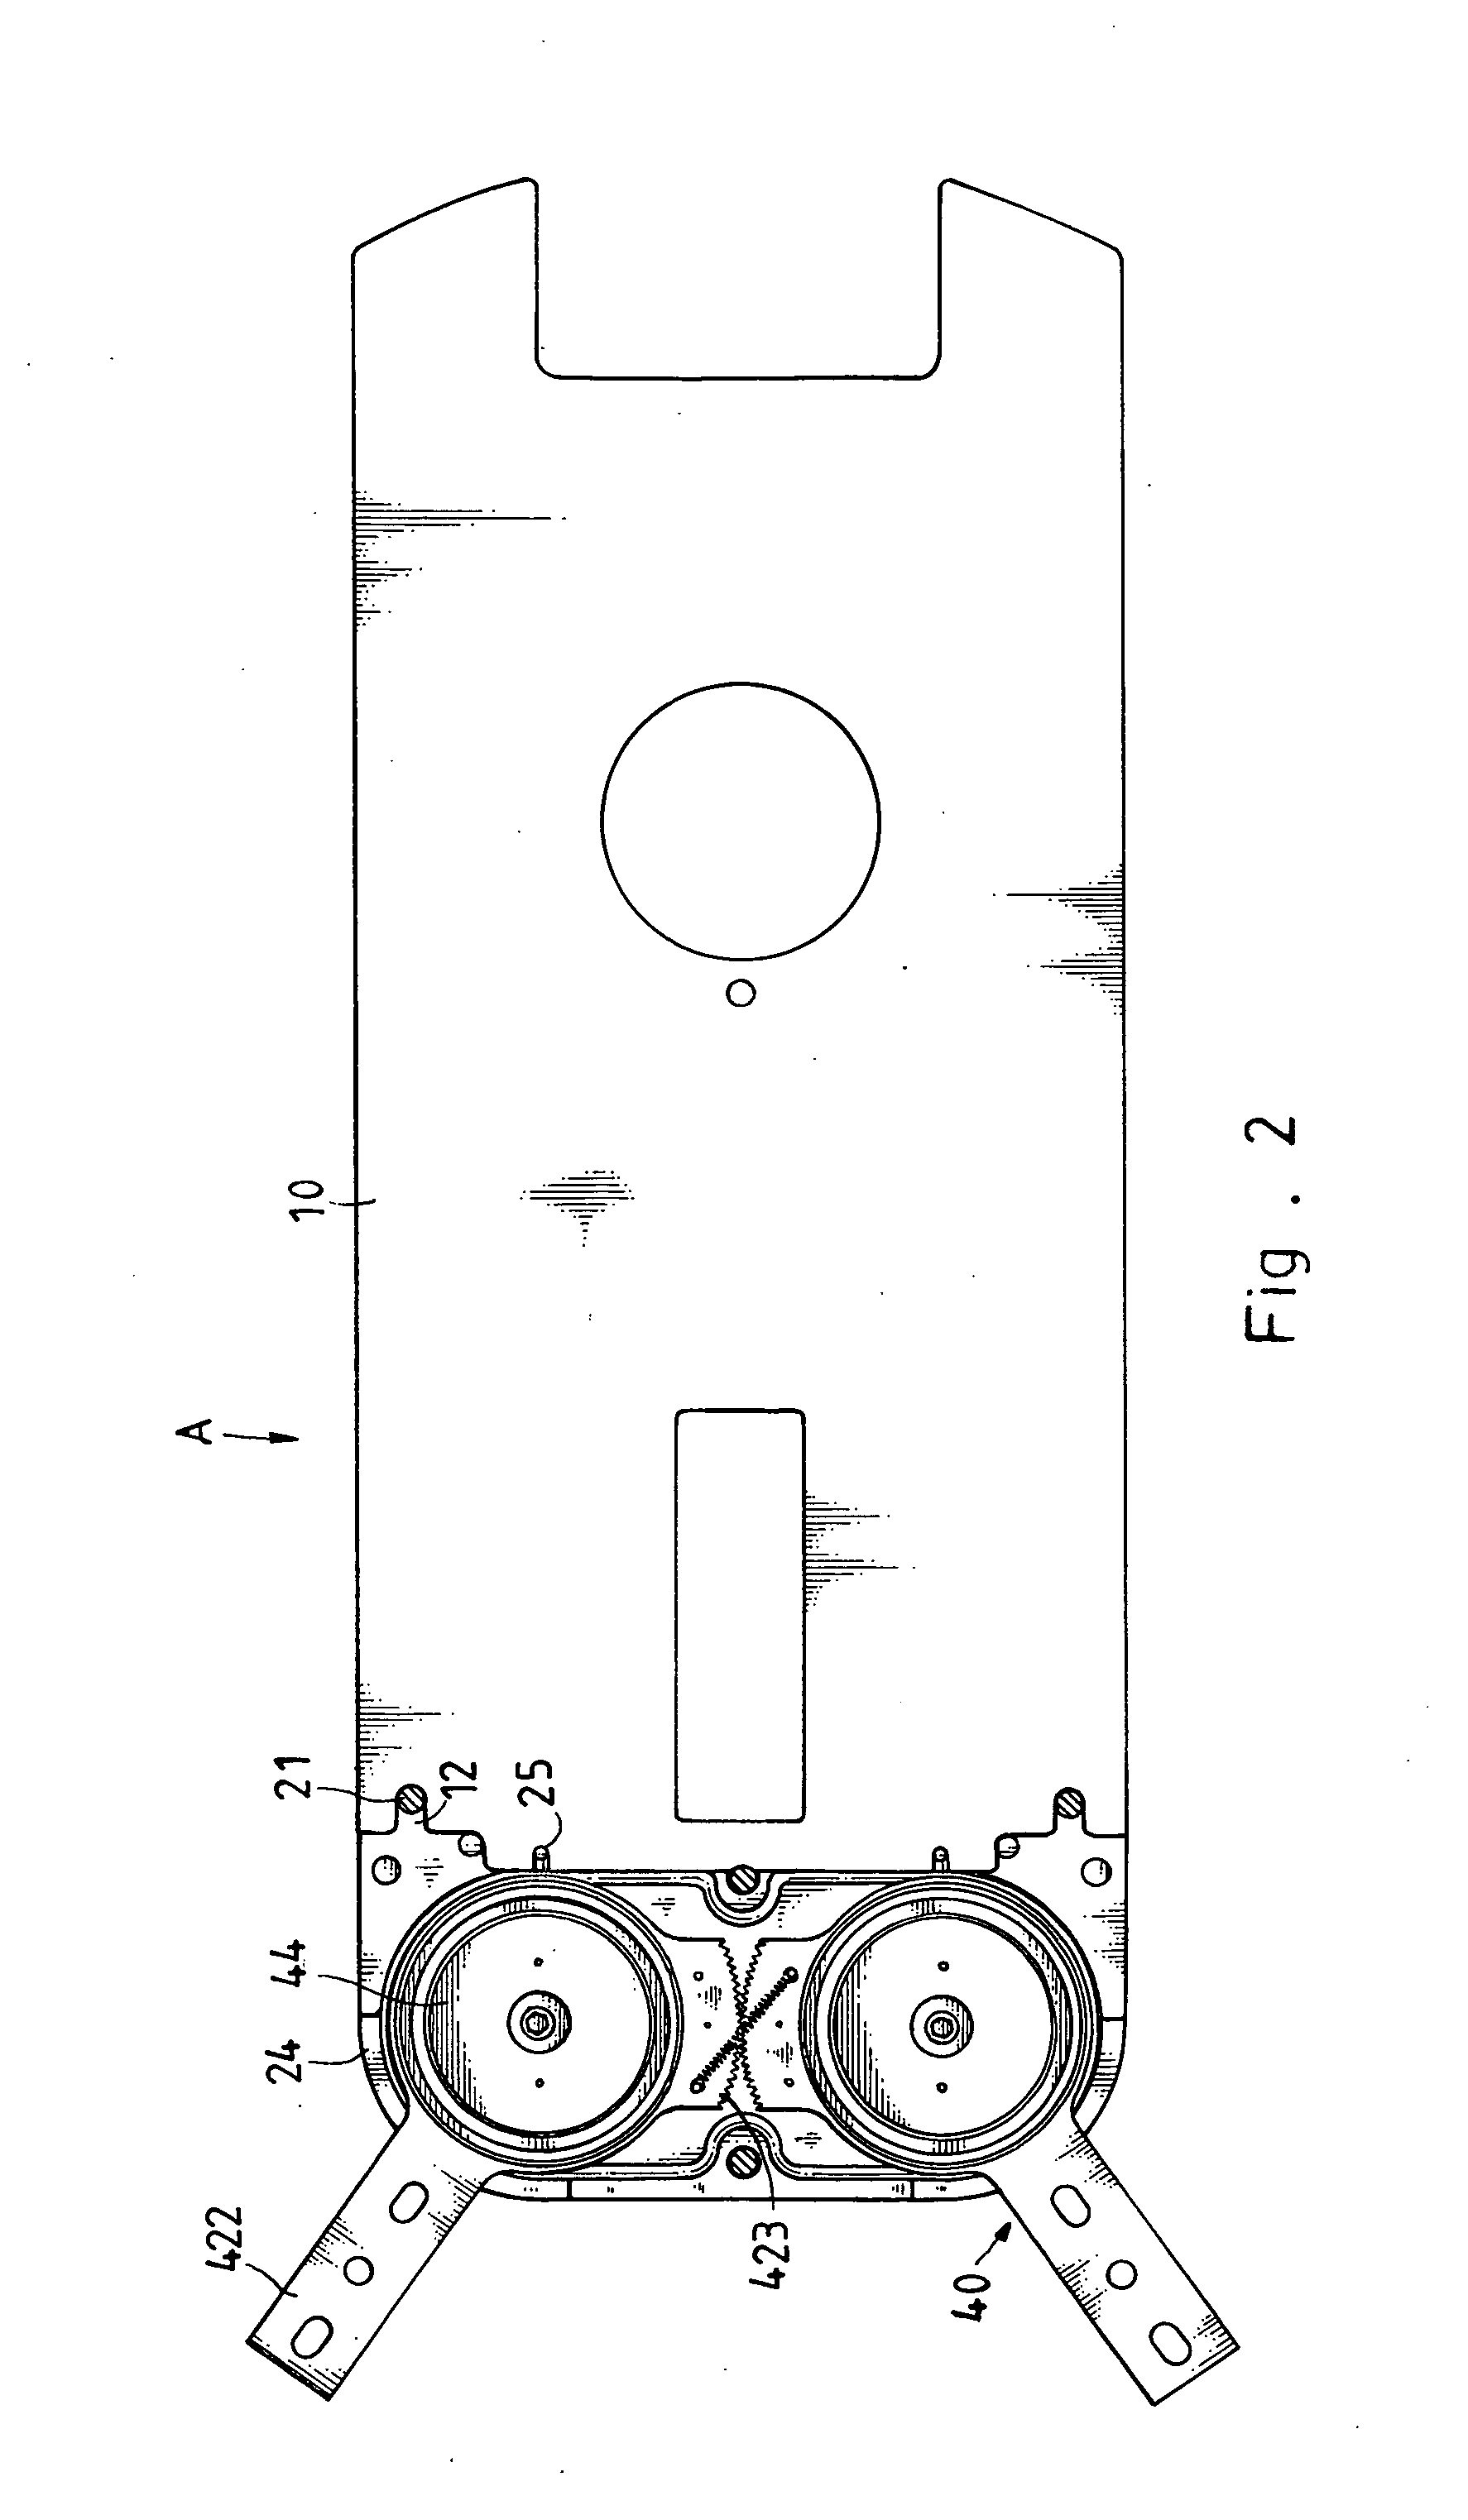 Blade assembly for transmission of semiconductor chip